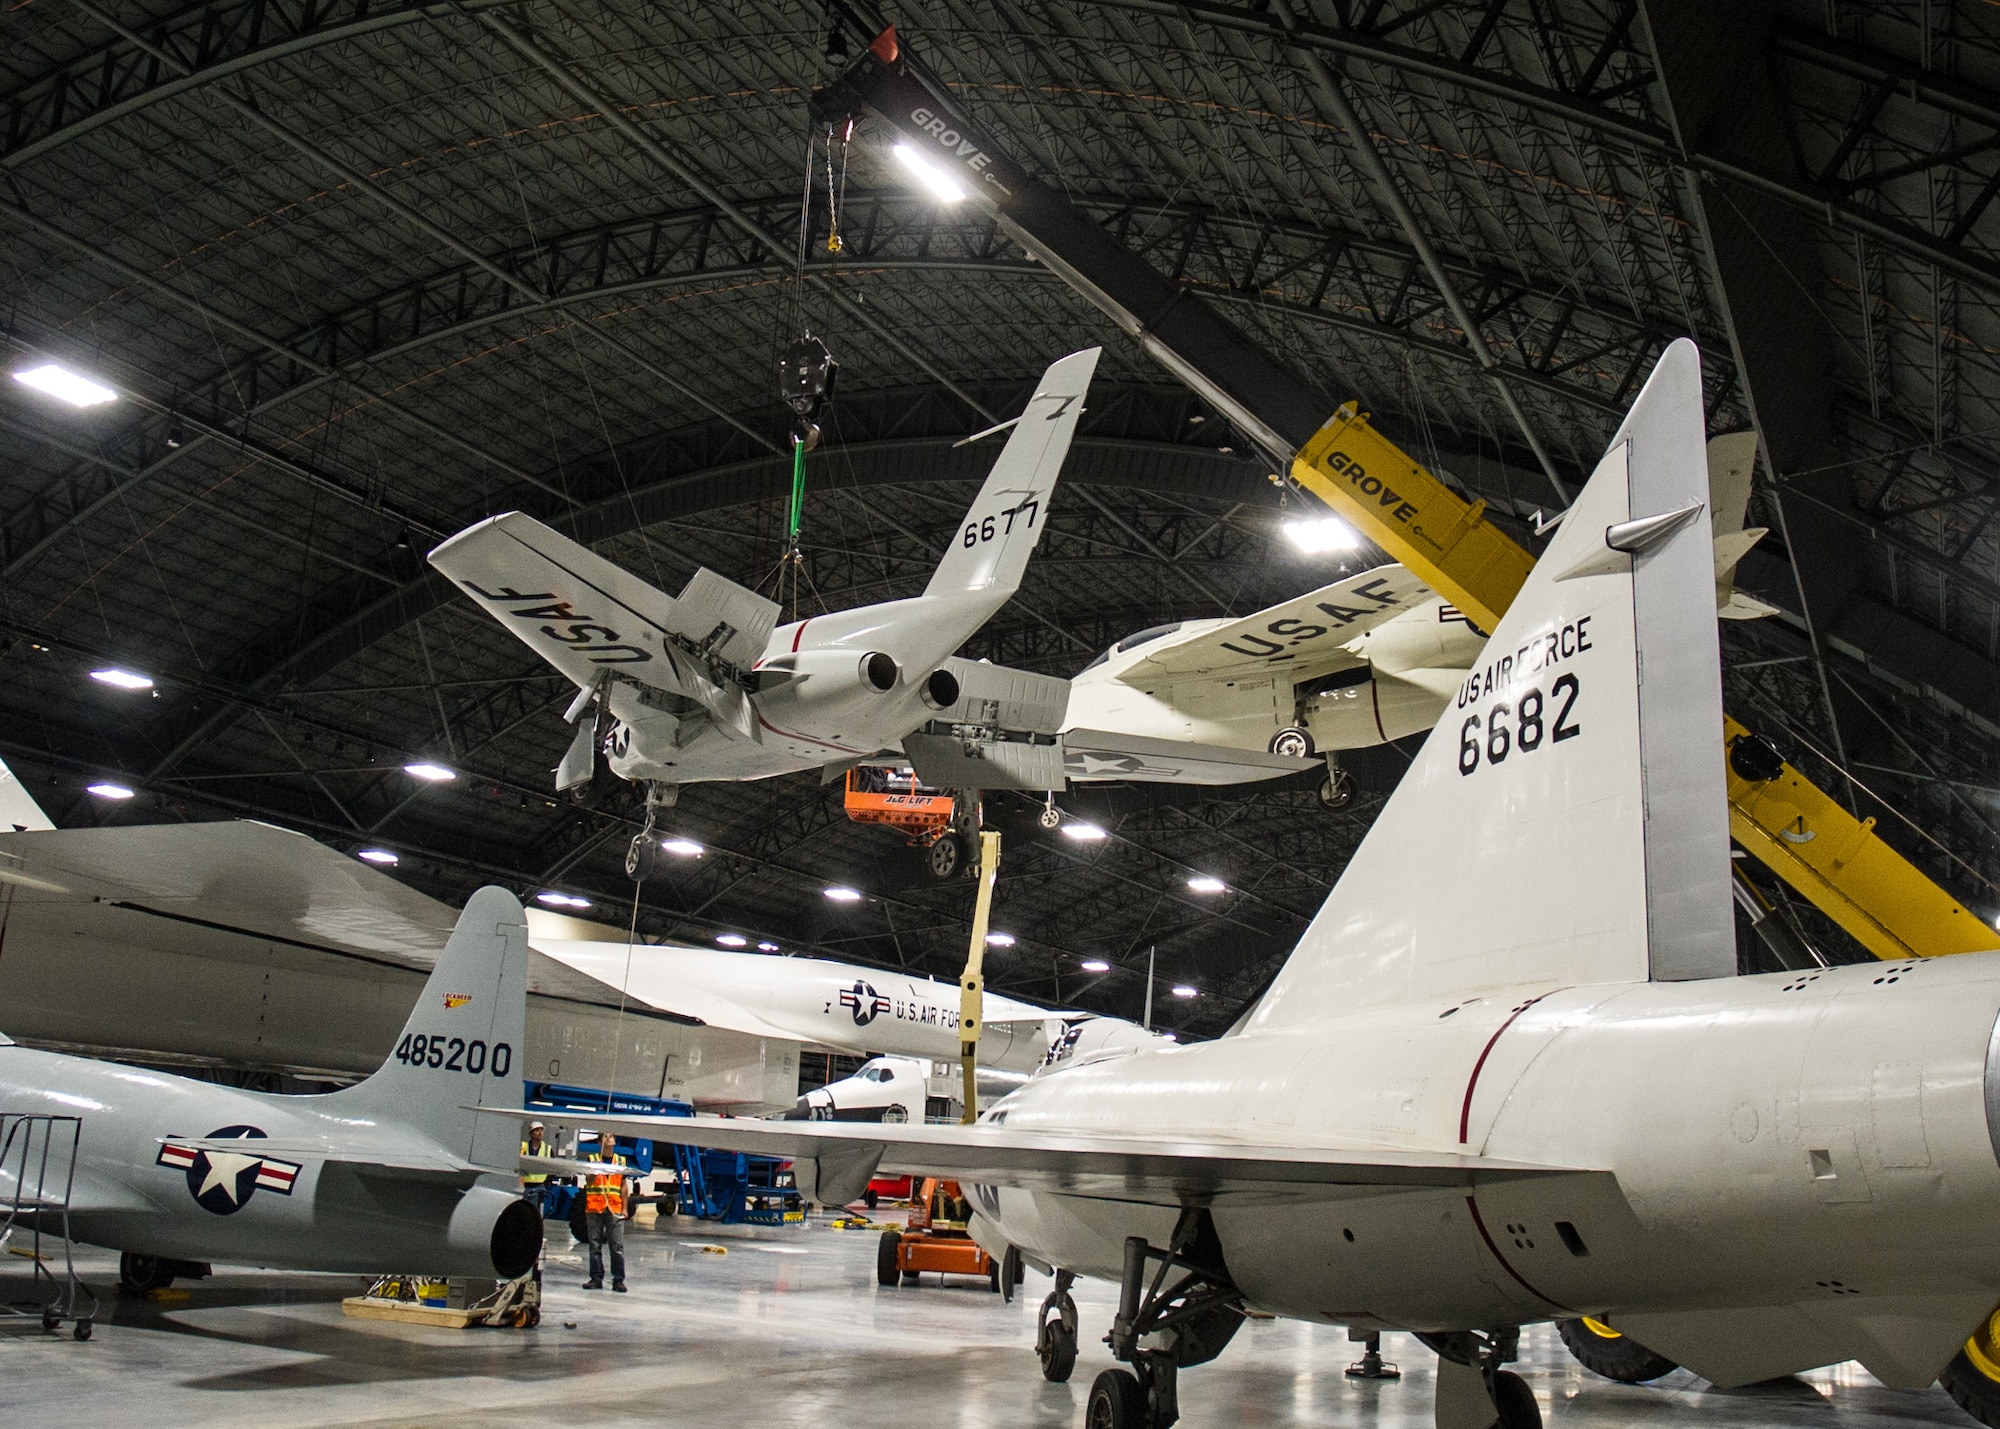 Restoration staff move R&D aircraft into position within the new fourth building at the National Museum of the U.S. Air Force in November 2015. (U.S. Air Force photo)